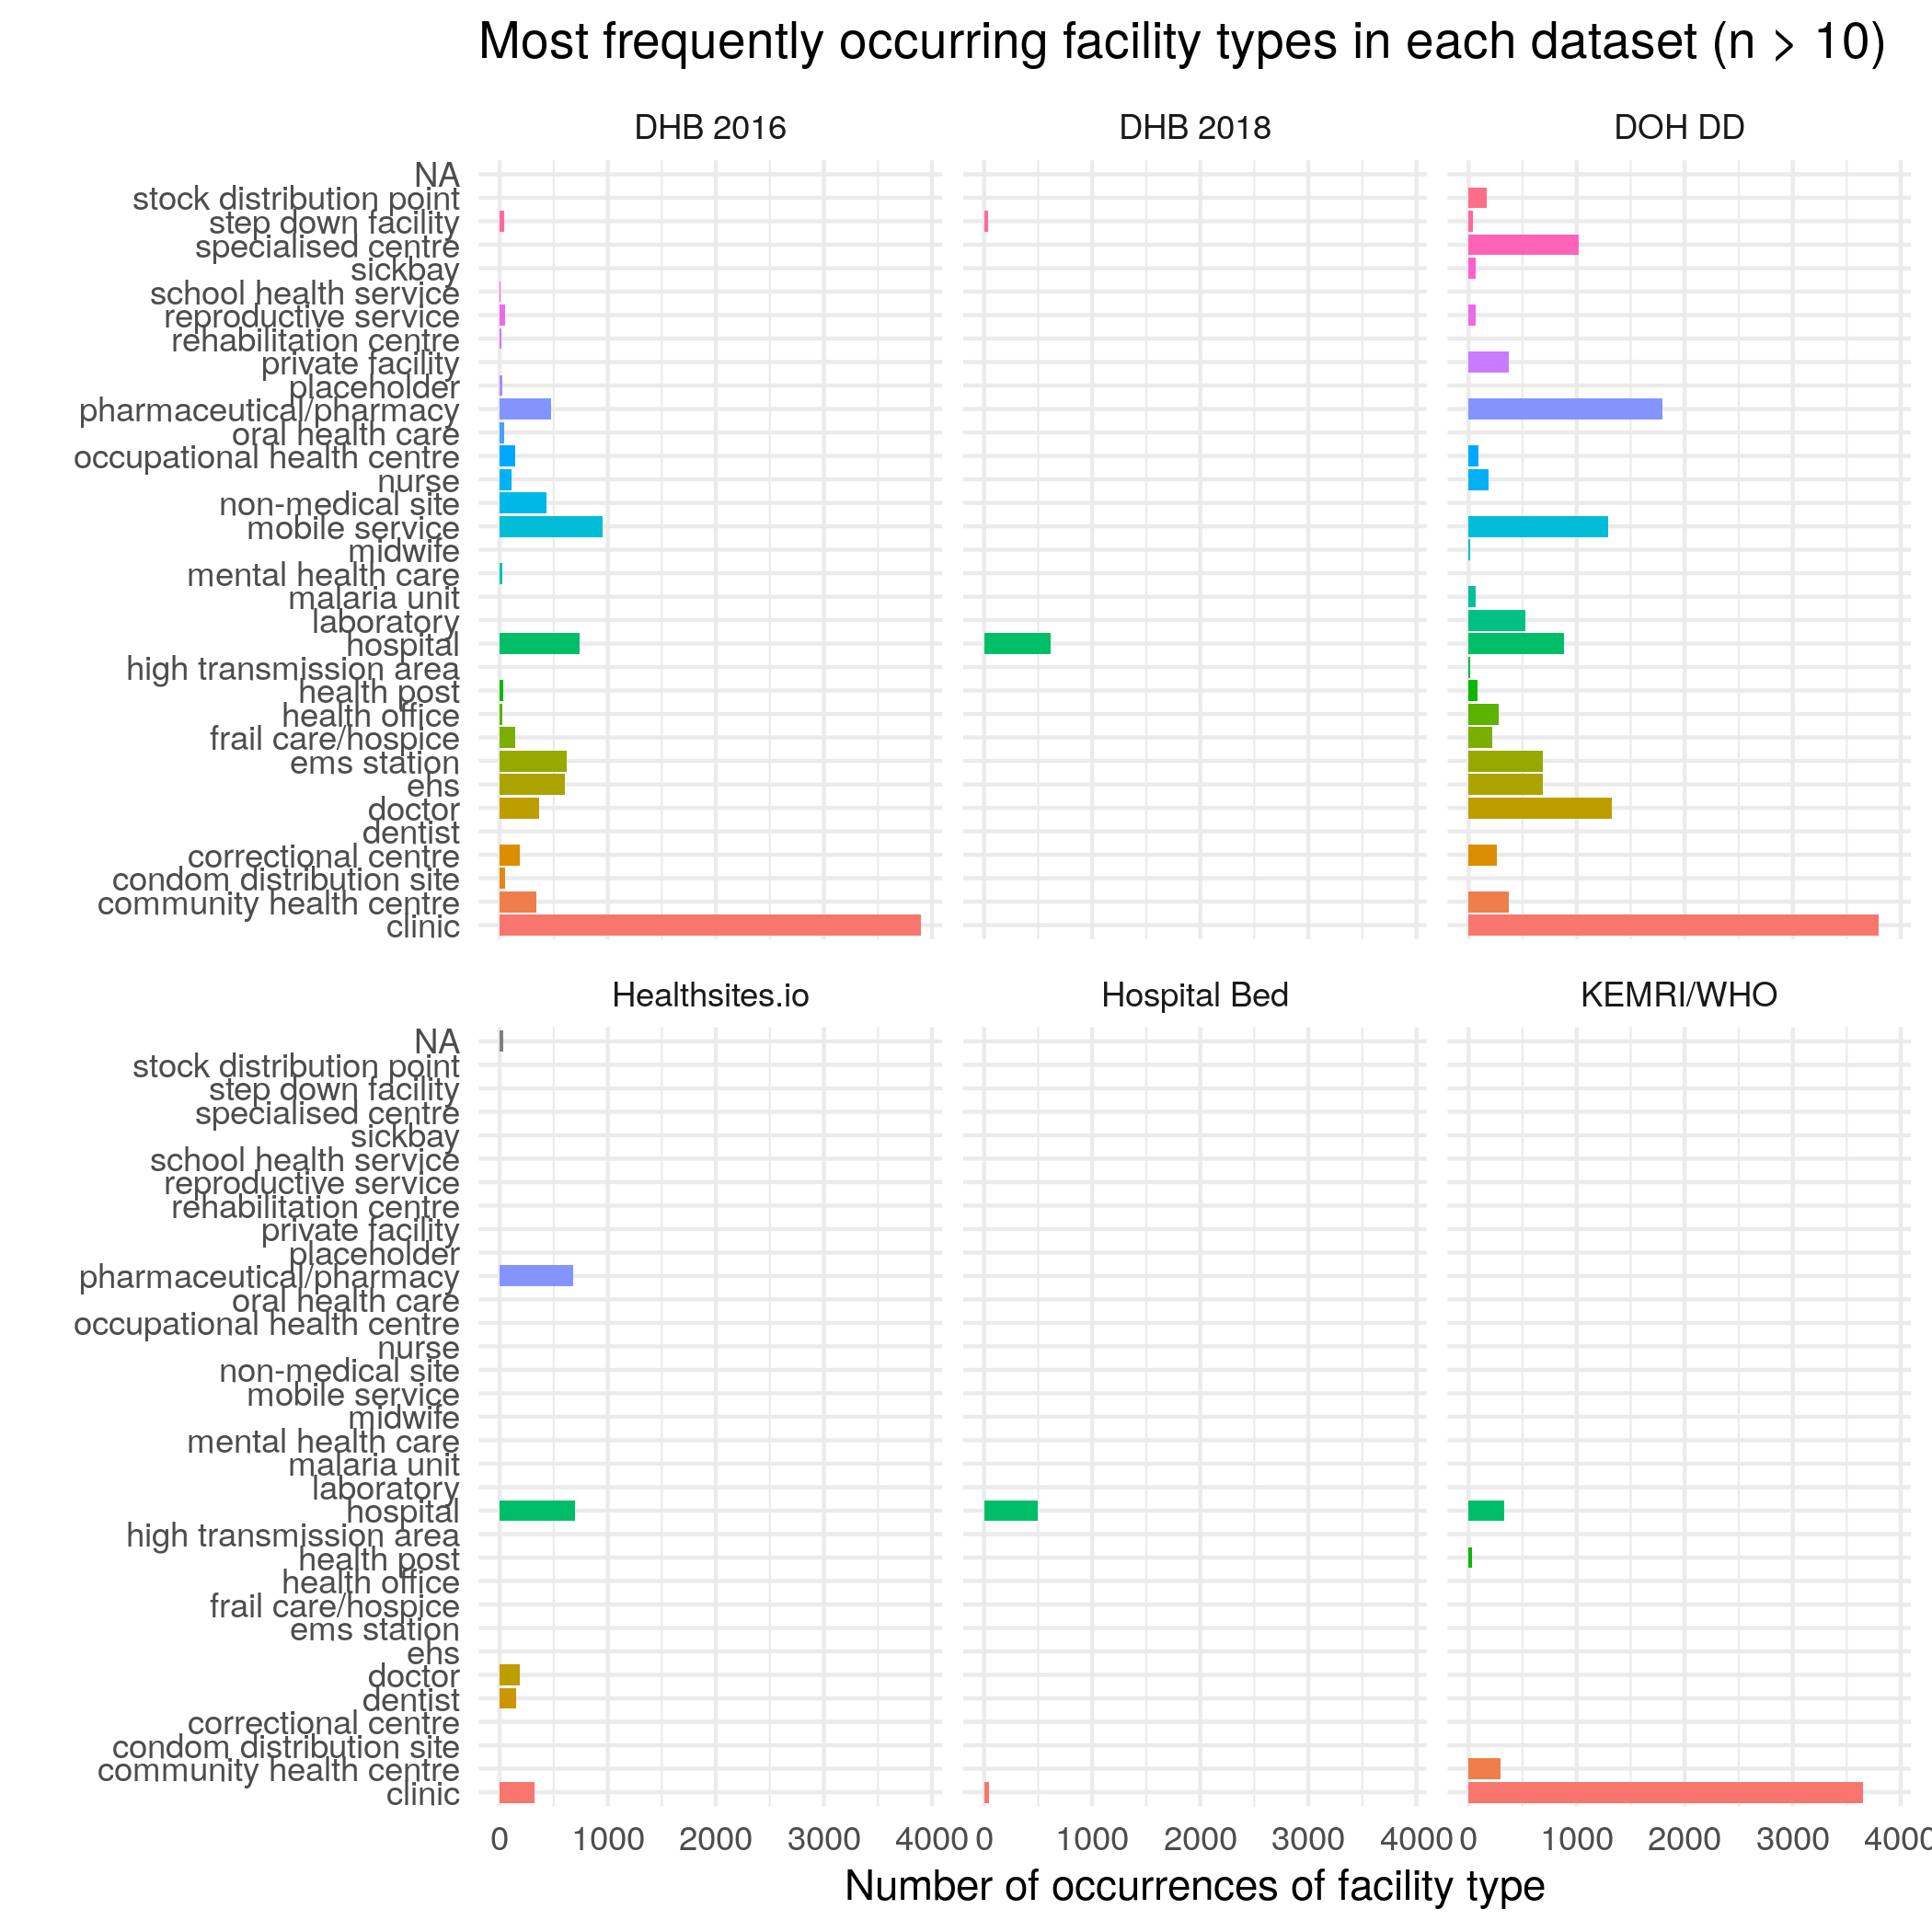 The frequency of various types of health facilities listed in each dataset